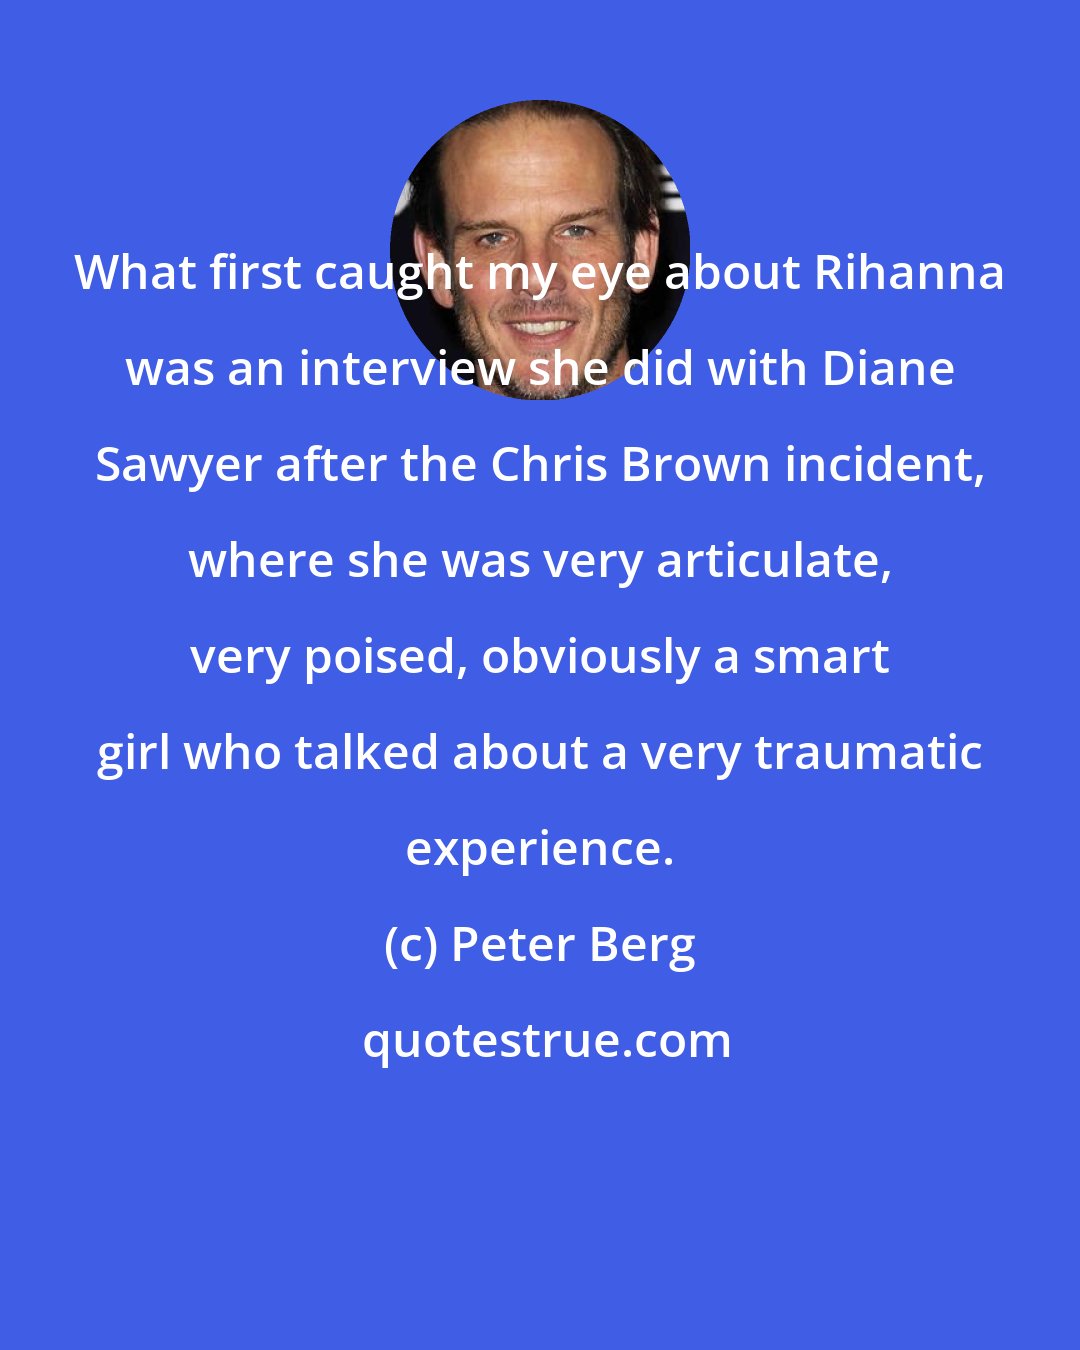 Peter Berg: What first caught my eye about Rihanna was an interview she did with Diane Sawyer after the Chris Brown incident, where she was very articulate, very poised, obviously a smart girl who talked about a very traumatic experience.